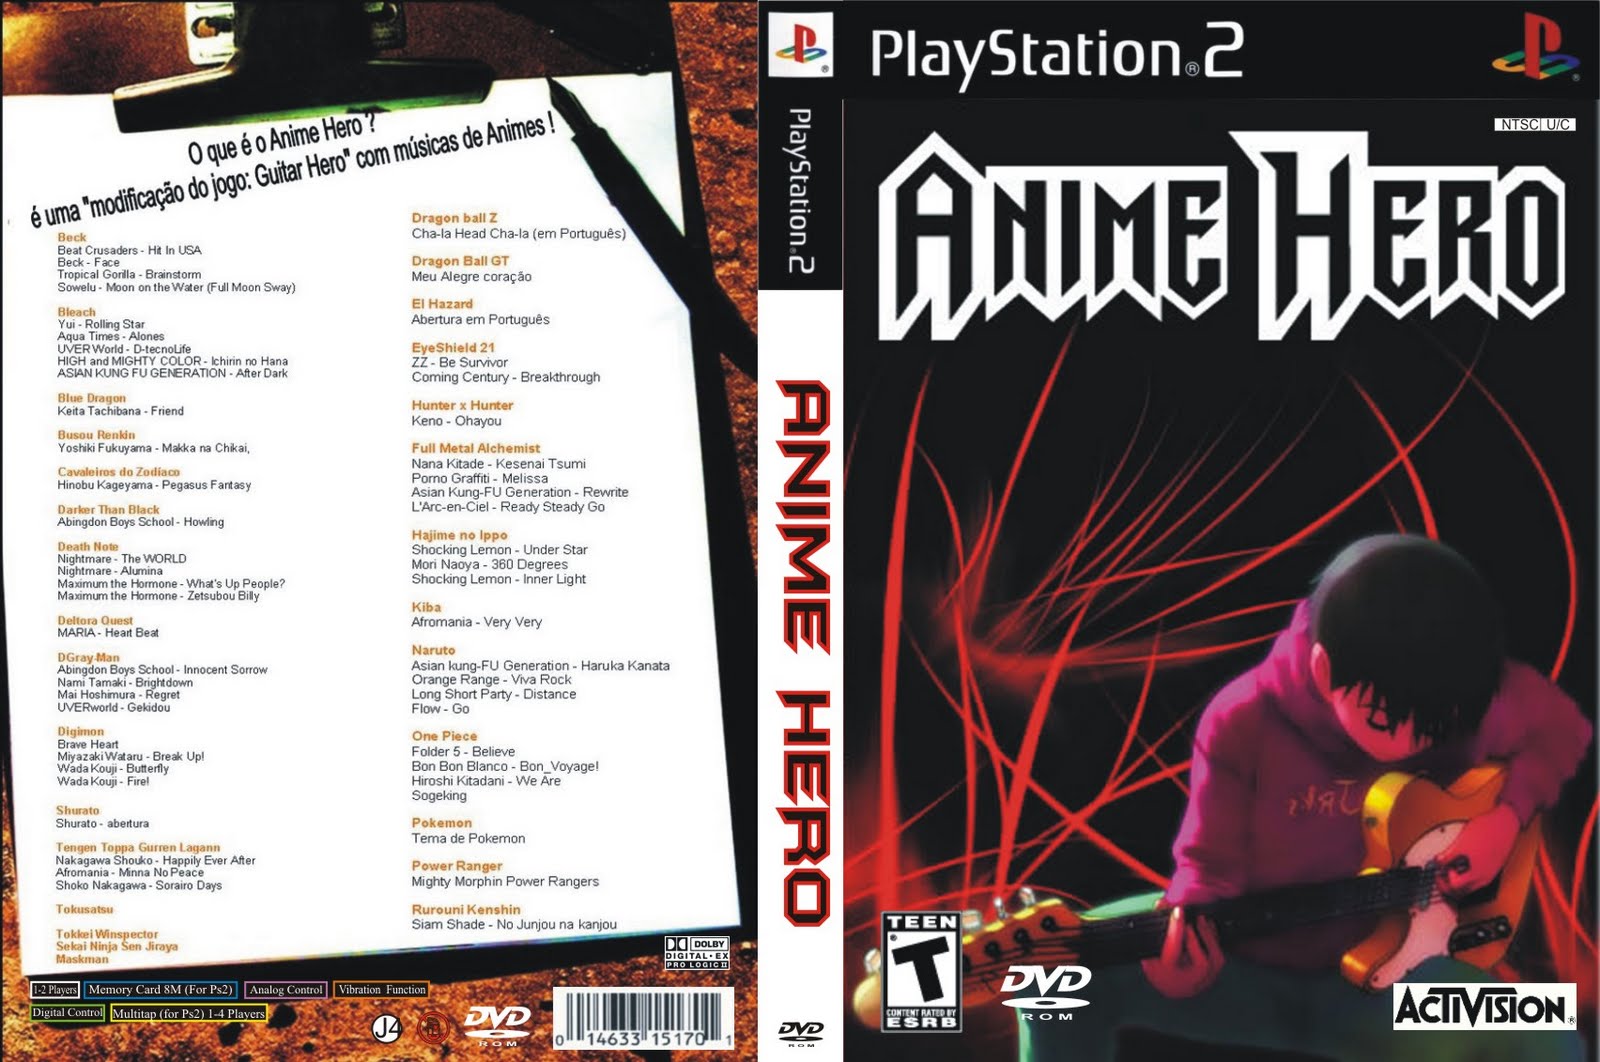 Download anime hero ps2 iso download